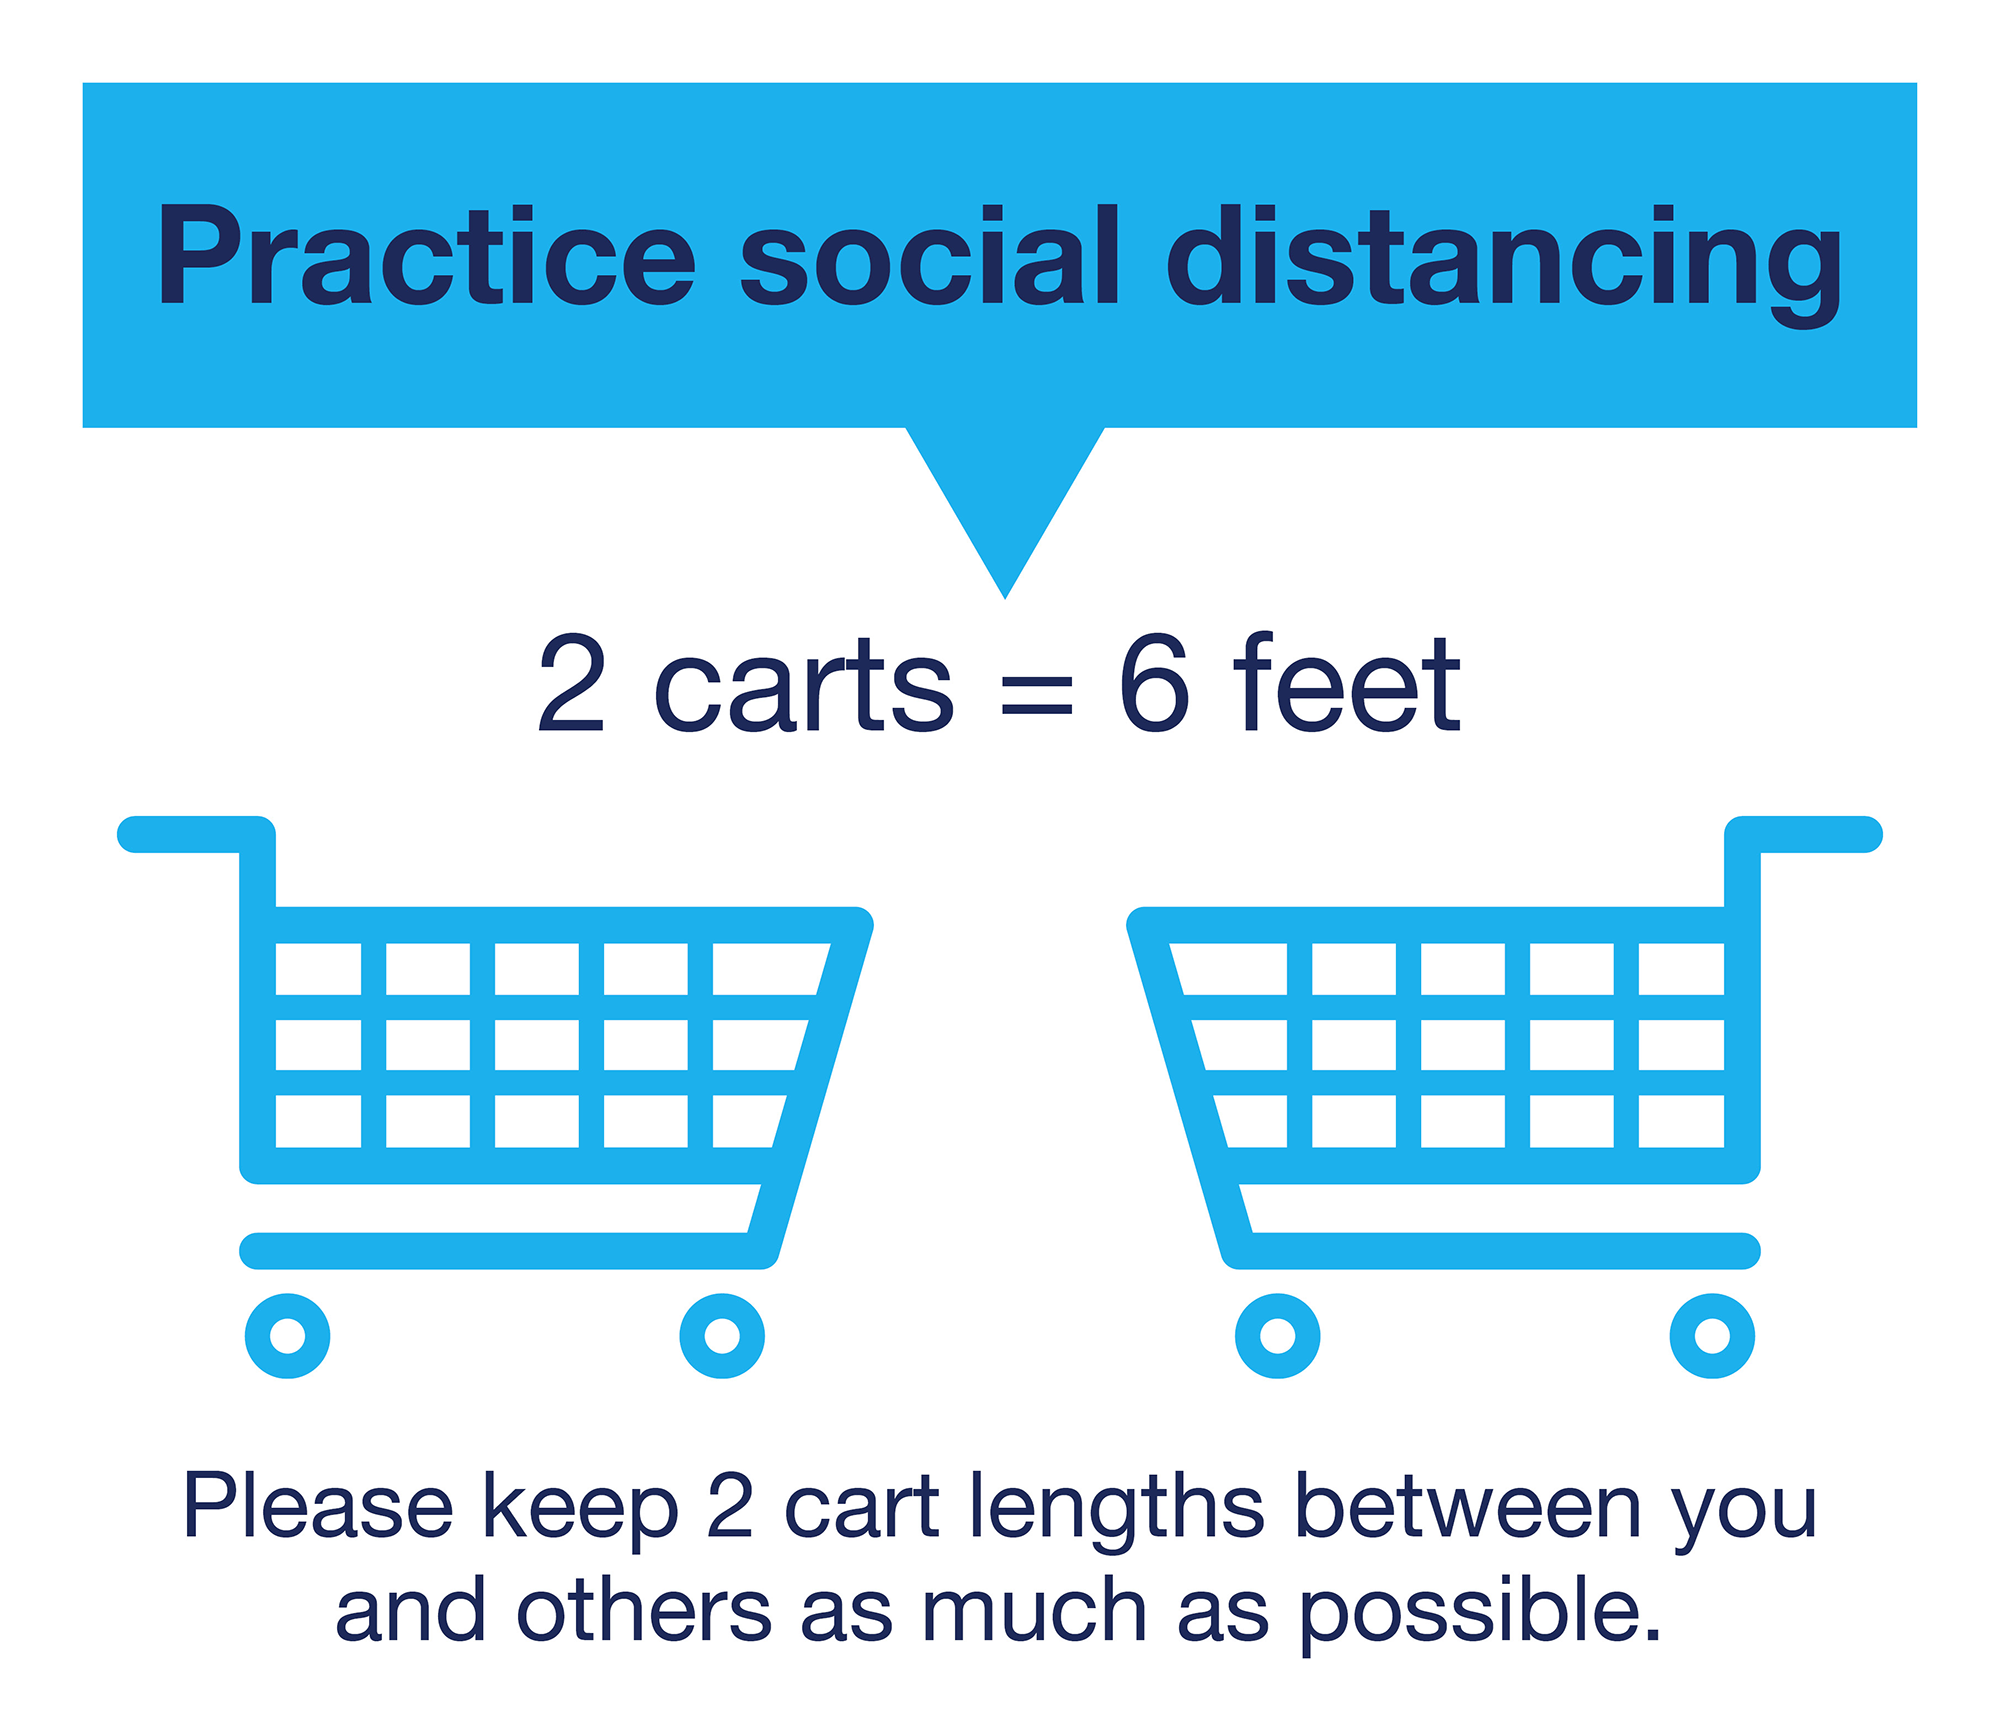 Please keep 2 cart lengths between you and others as much as possible